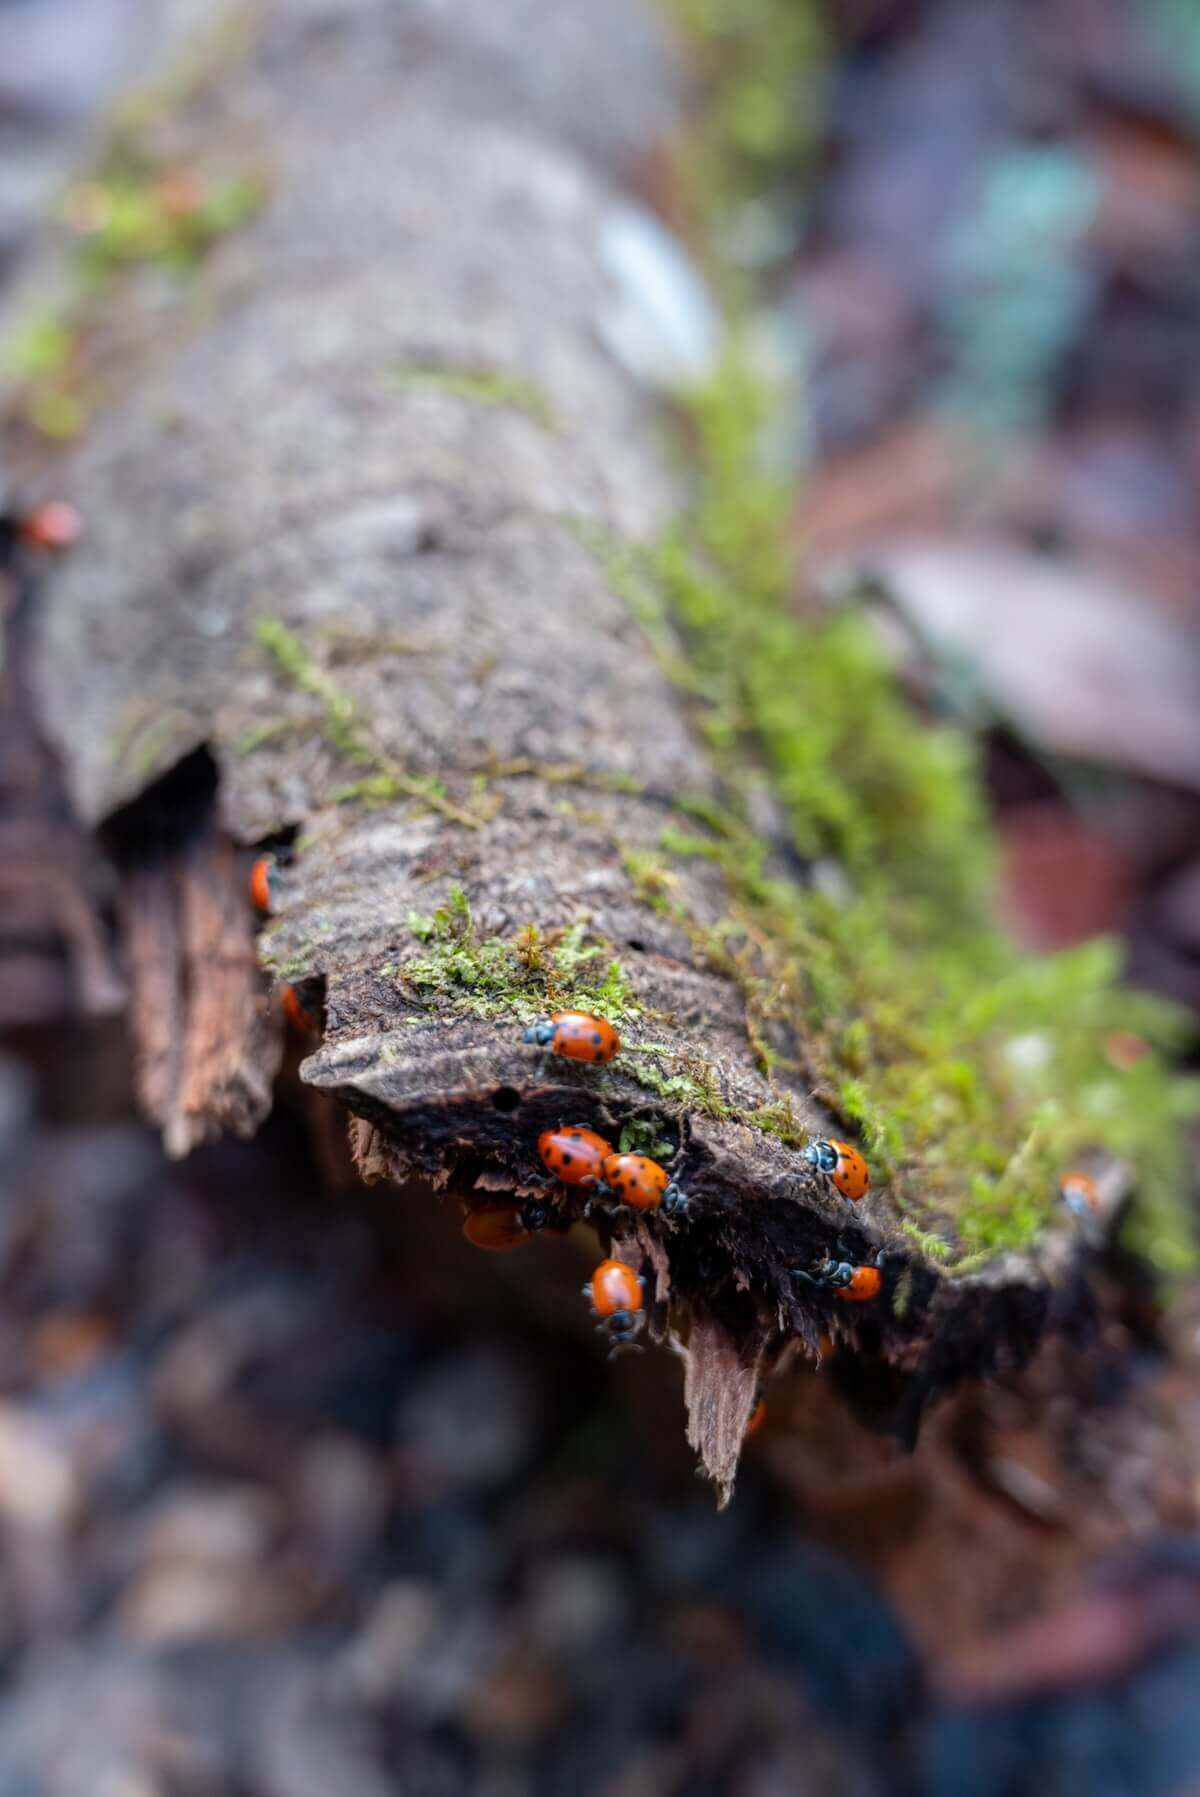 A close-up of ladybugs walking on the end of a mossy, fallen log.